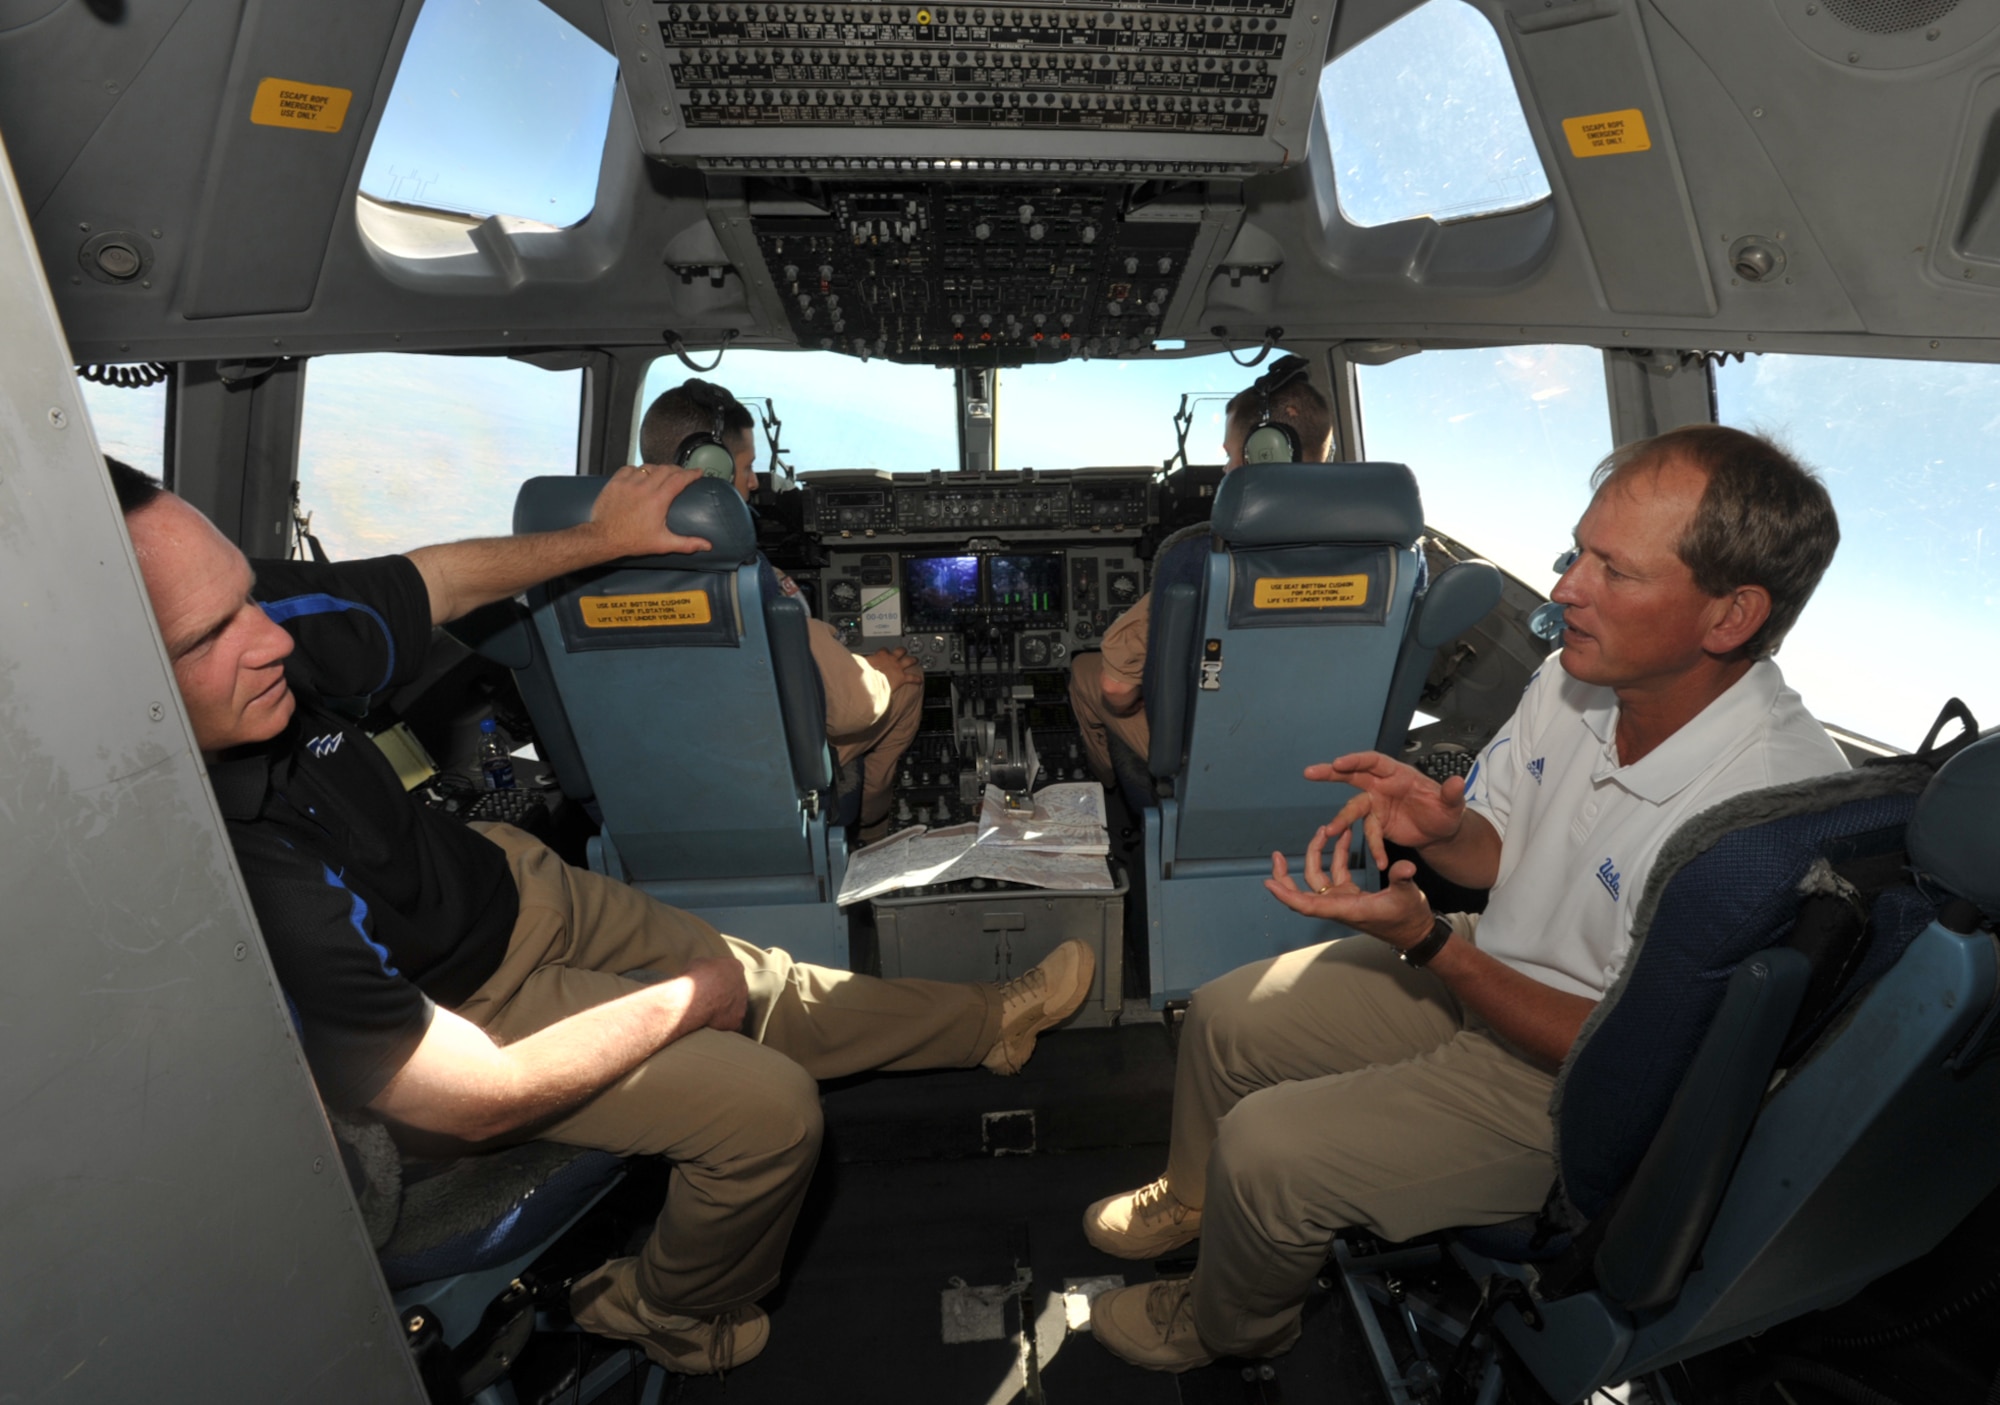 UCLA football coach Rick Neuheisel (on right) and Air Force football coach Troy Calhoun talk while riding inside the cockpit of an Air Force C-17 Globemaster headed to Iraq. The flight was part of Coaches Tour 2009, a morale-boosting mission that brought NCAA football coaches to U.S. servicemembers overseas. (U.S. Air Force photo/Tech. Sgt. Jason Schaap)